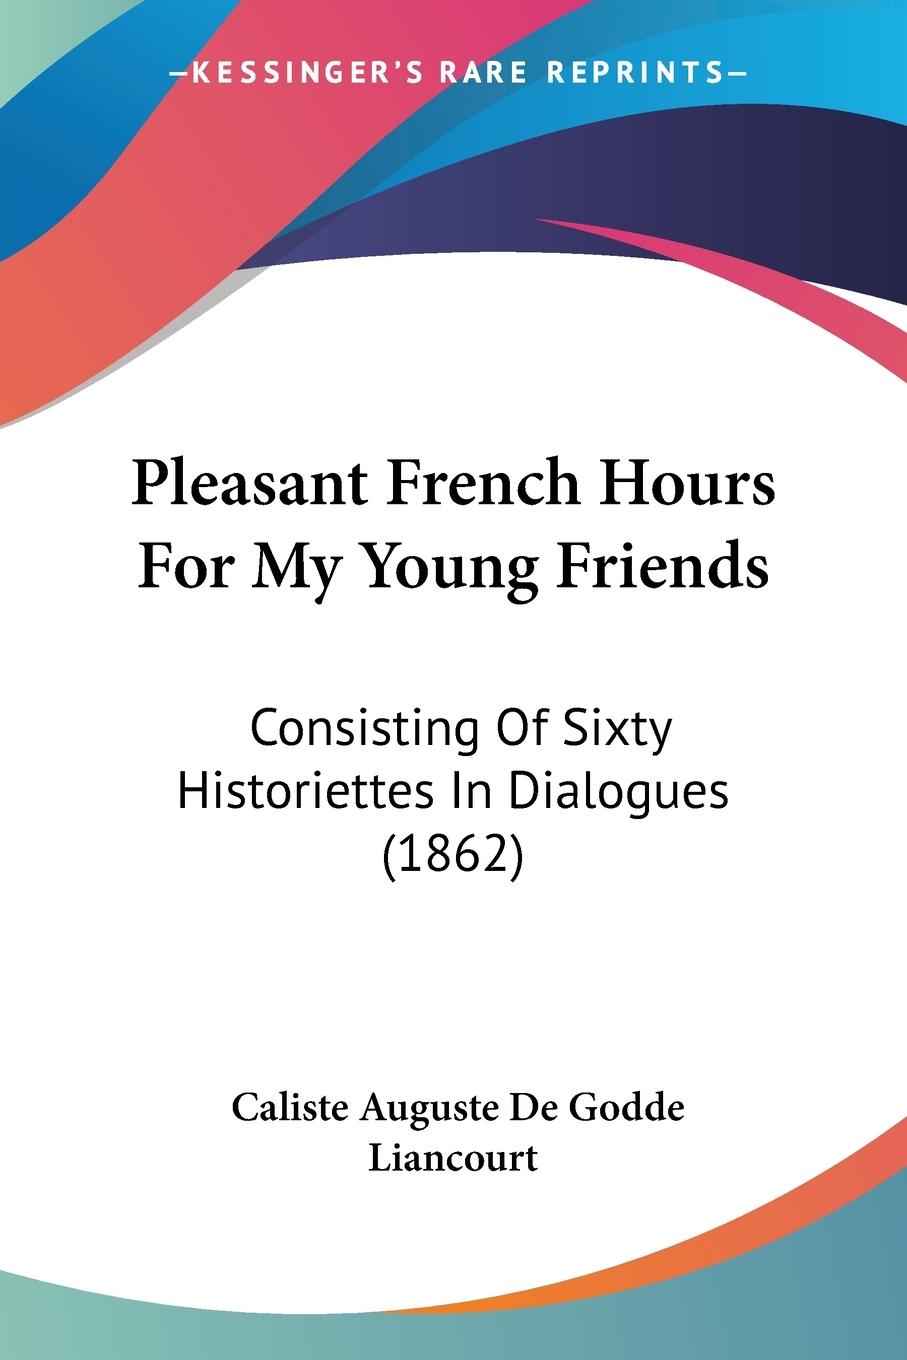 Pleasant French Hours For My Young Friends - Liancourt, Caliste Auguste De Godde